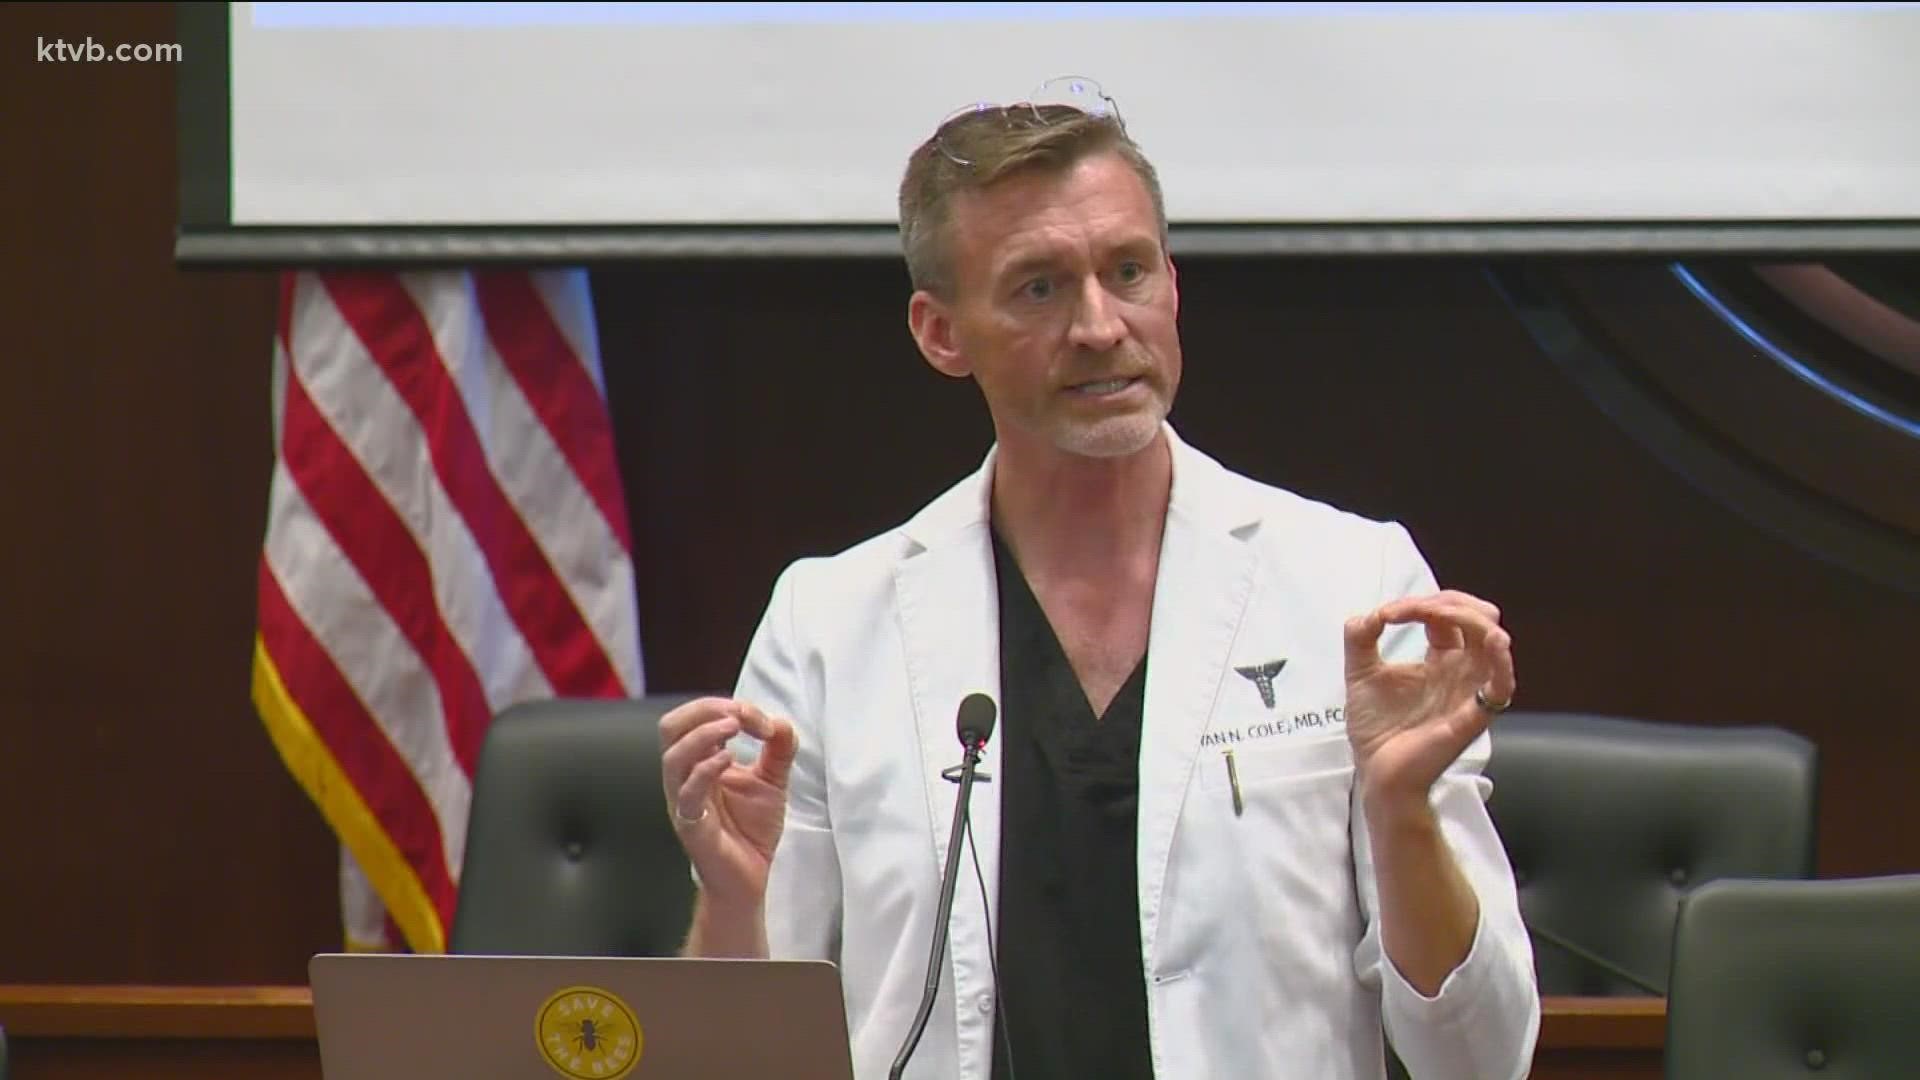 The controversial medical expert addressed issues ranging from natural immunity vs. vaccine immunity.